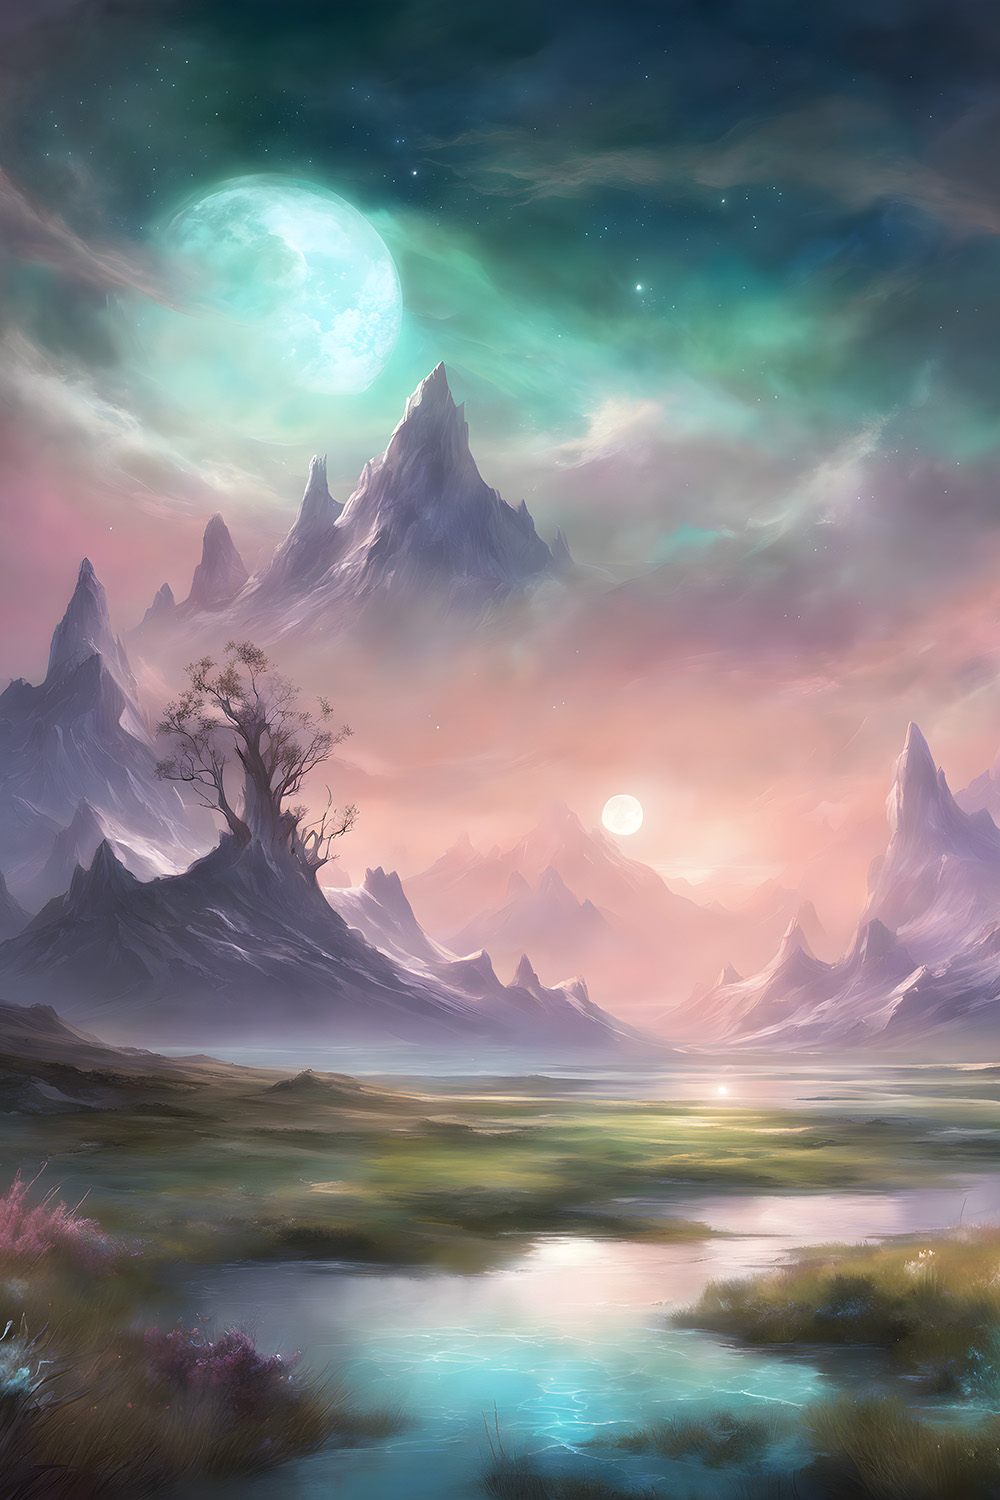 Fantasy plains, lakes, snowy mountains in the distance pinterest preview image.